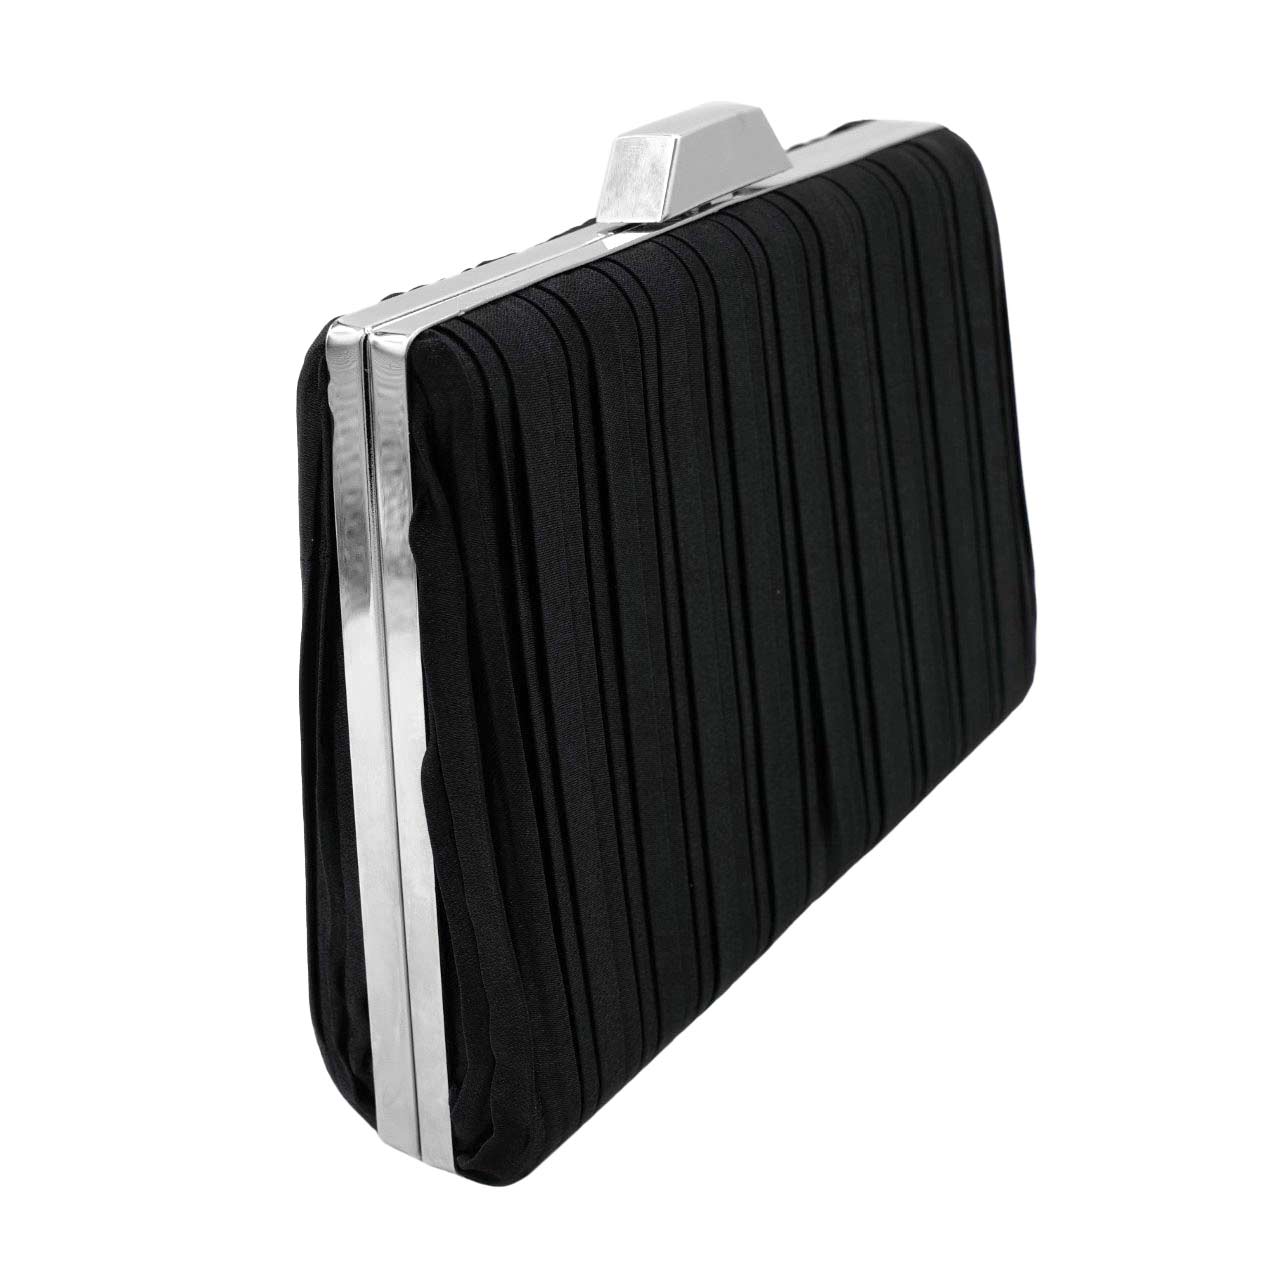 Black Pleated Evening Clutch Crossbody Bag, is beautifully designed and fit for all occasions & places. Show your trendy side with this awesome clutch crossbody bag. Have fun and look stylish. Versatile enough for carrying straight through the week, perfectly lightweight to carry around all day.  